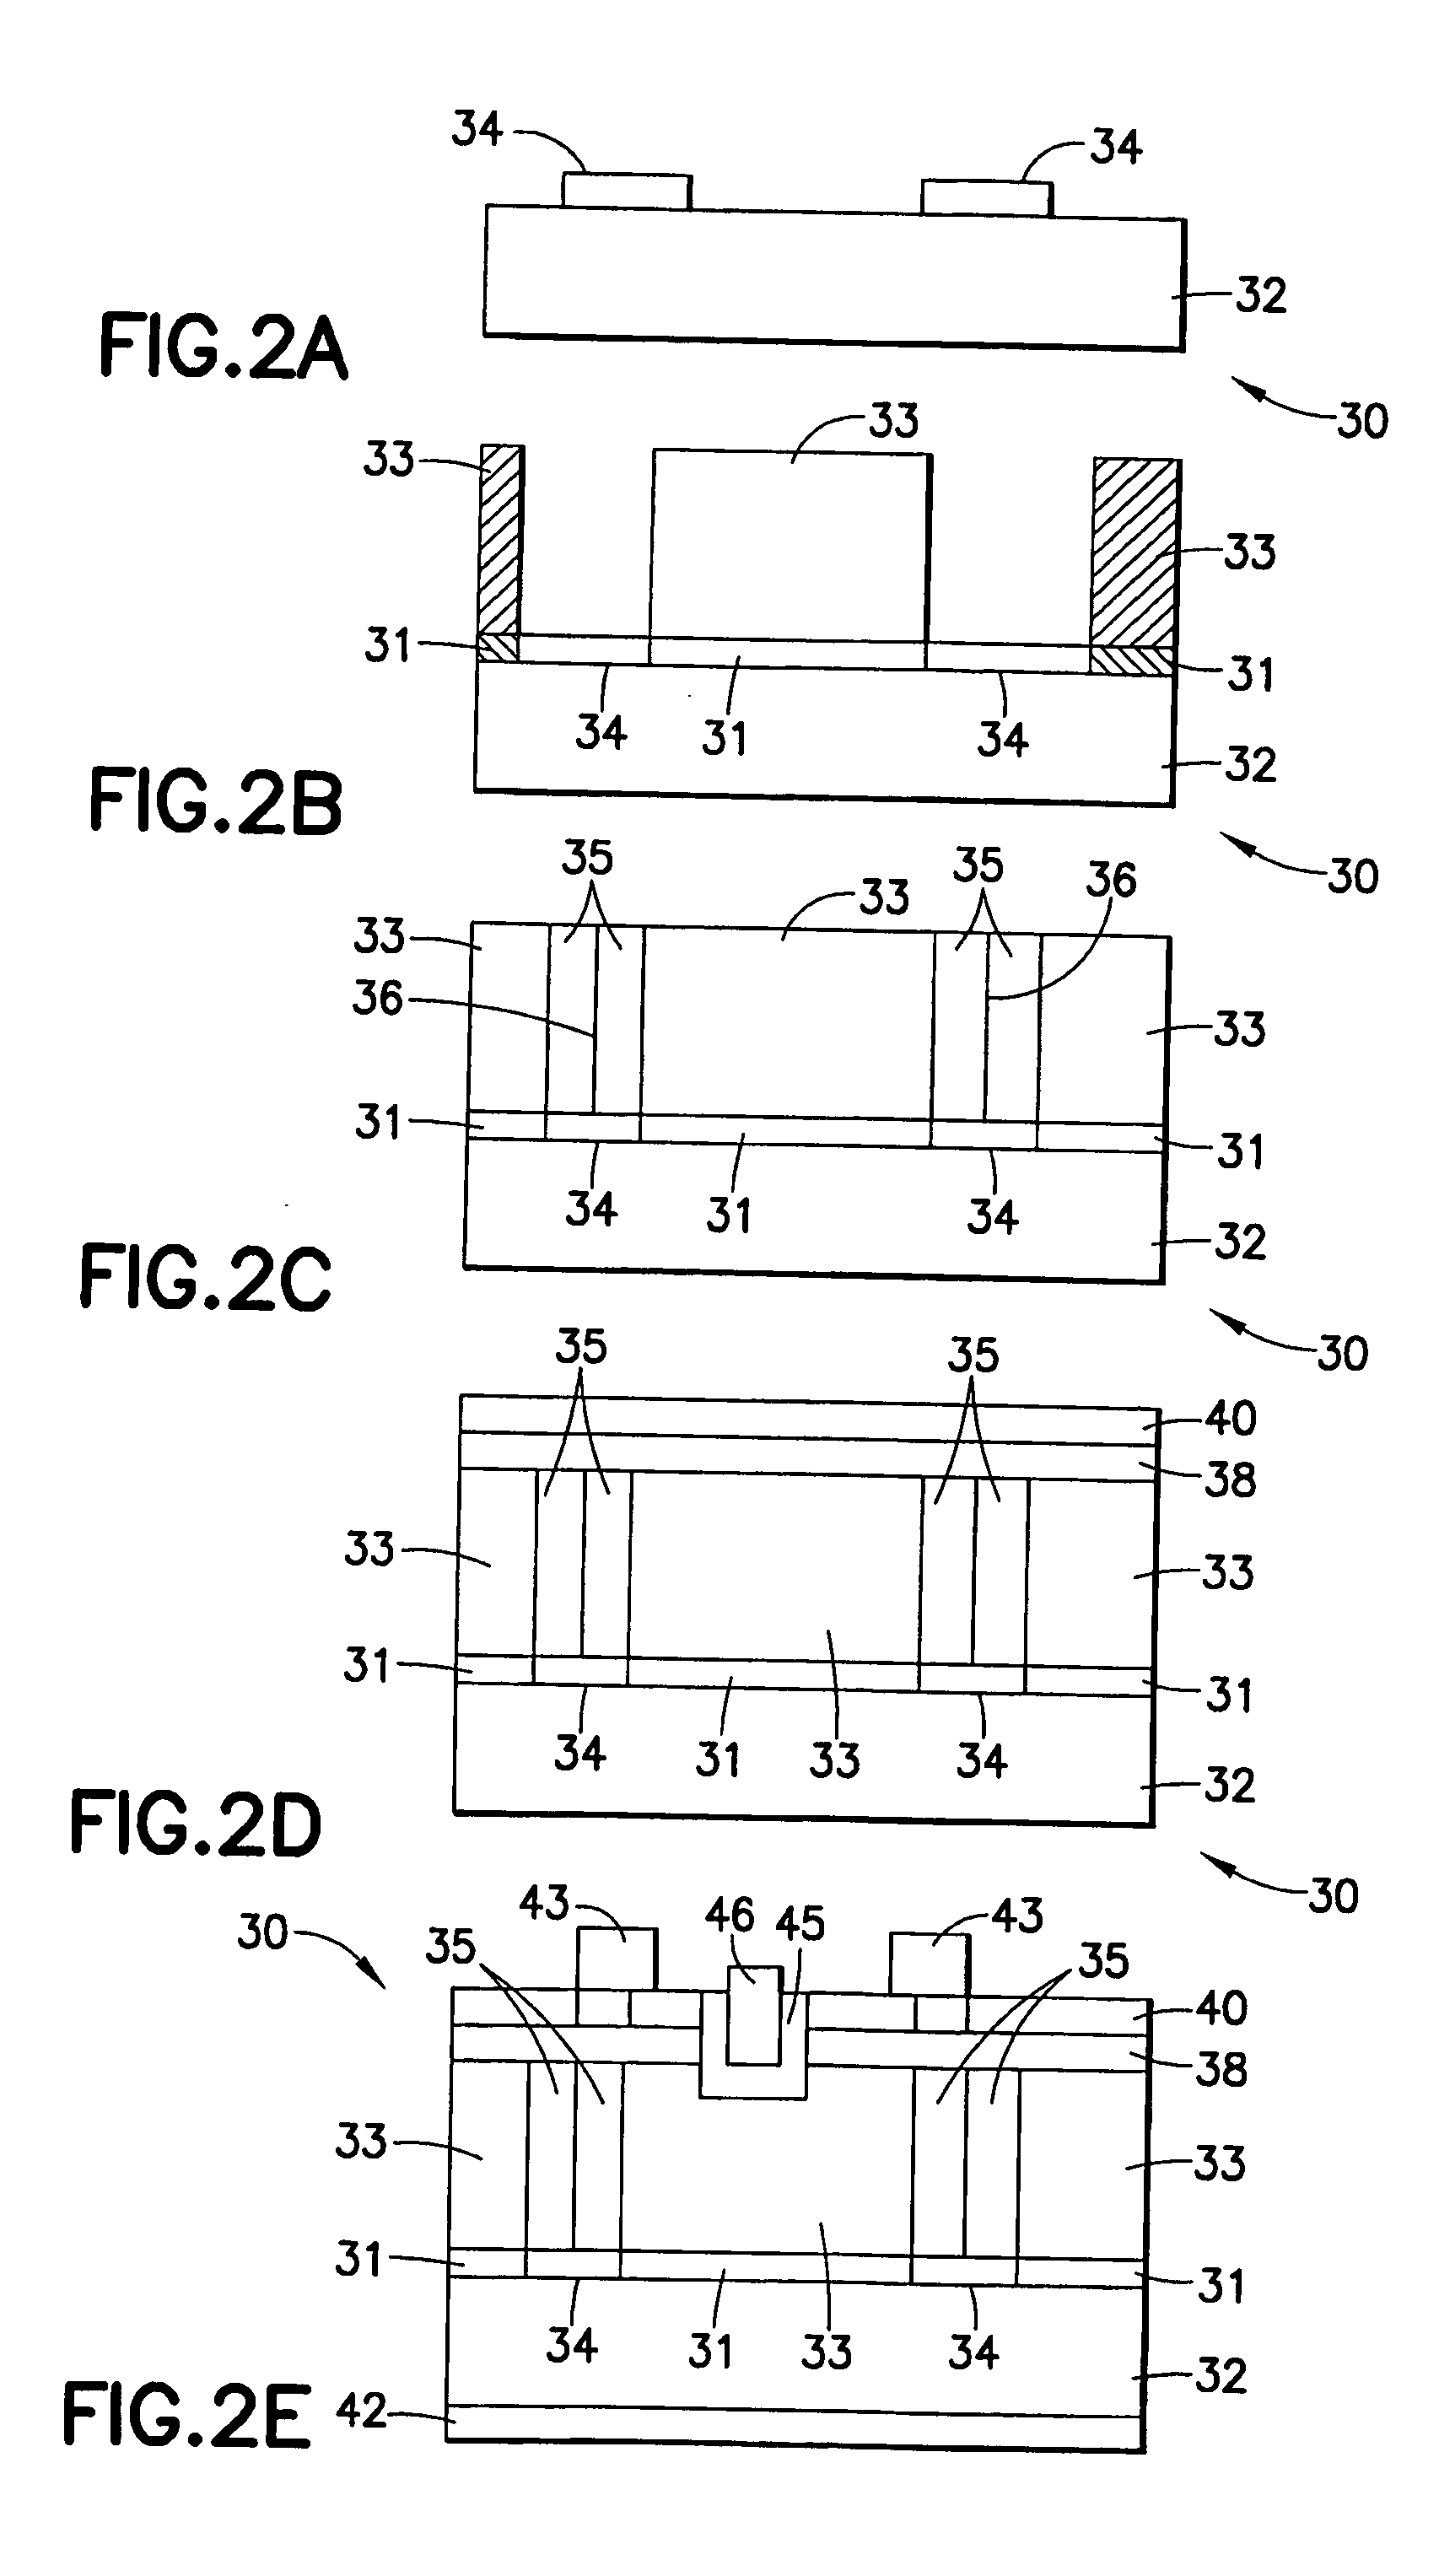 III-nitride device and method with variable epitaxial growth direction